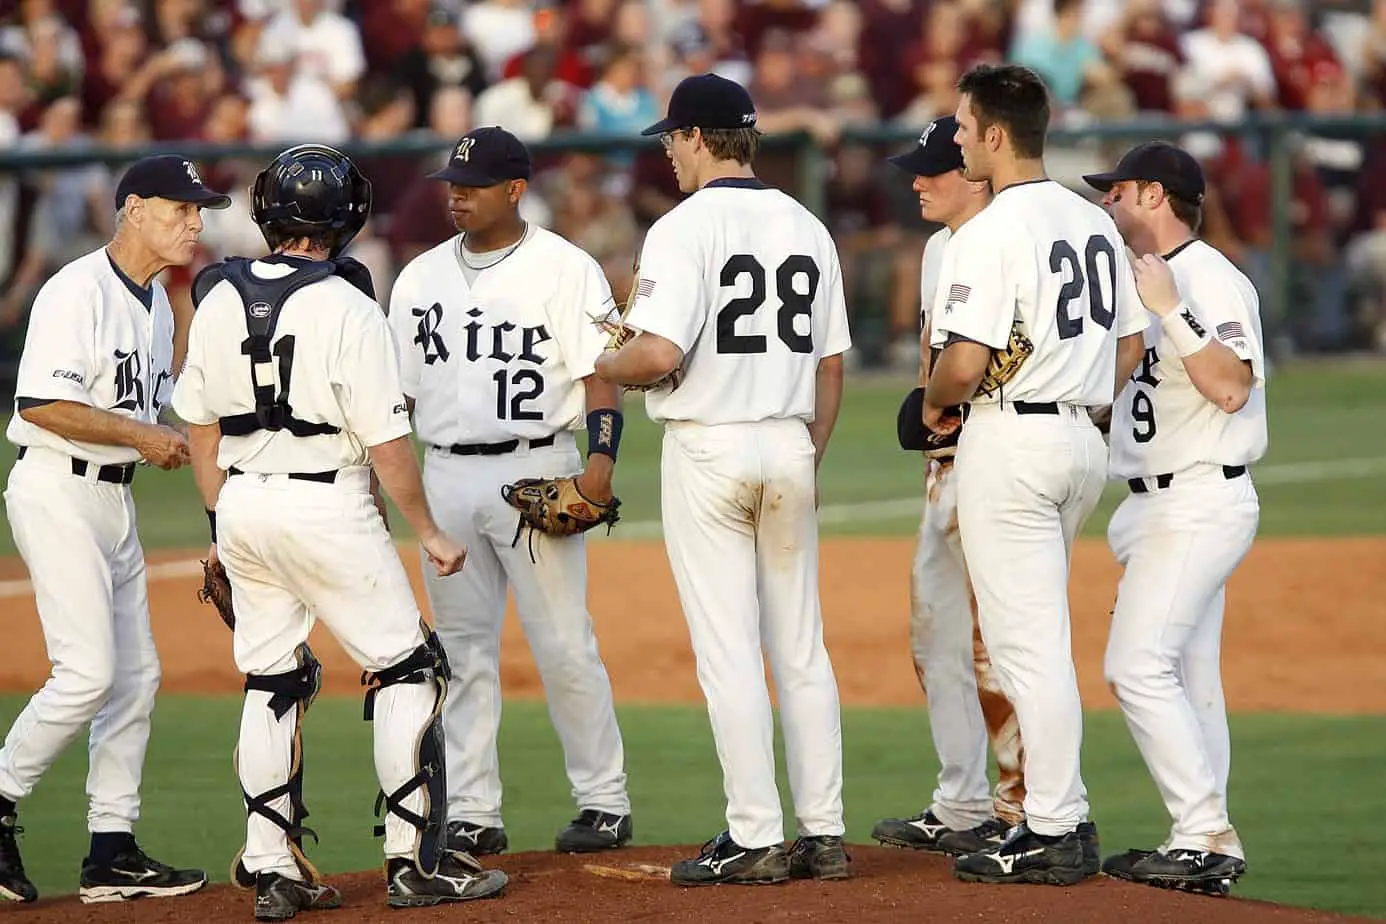 How To Coach 3rd Base: 5 Tips You Must Know